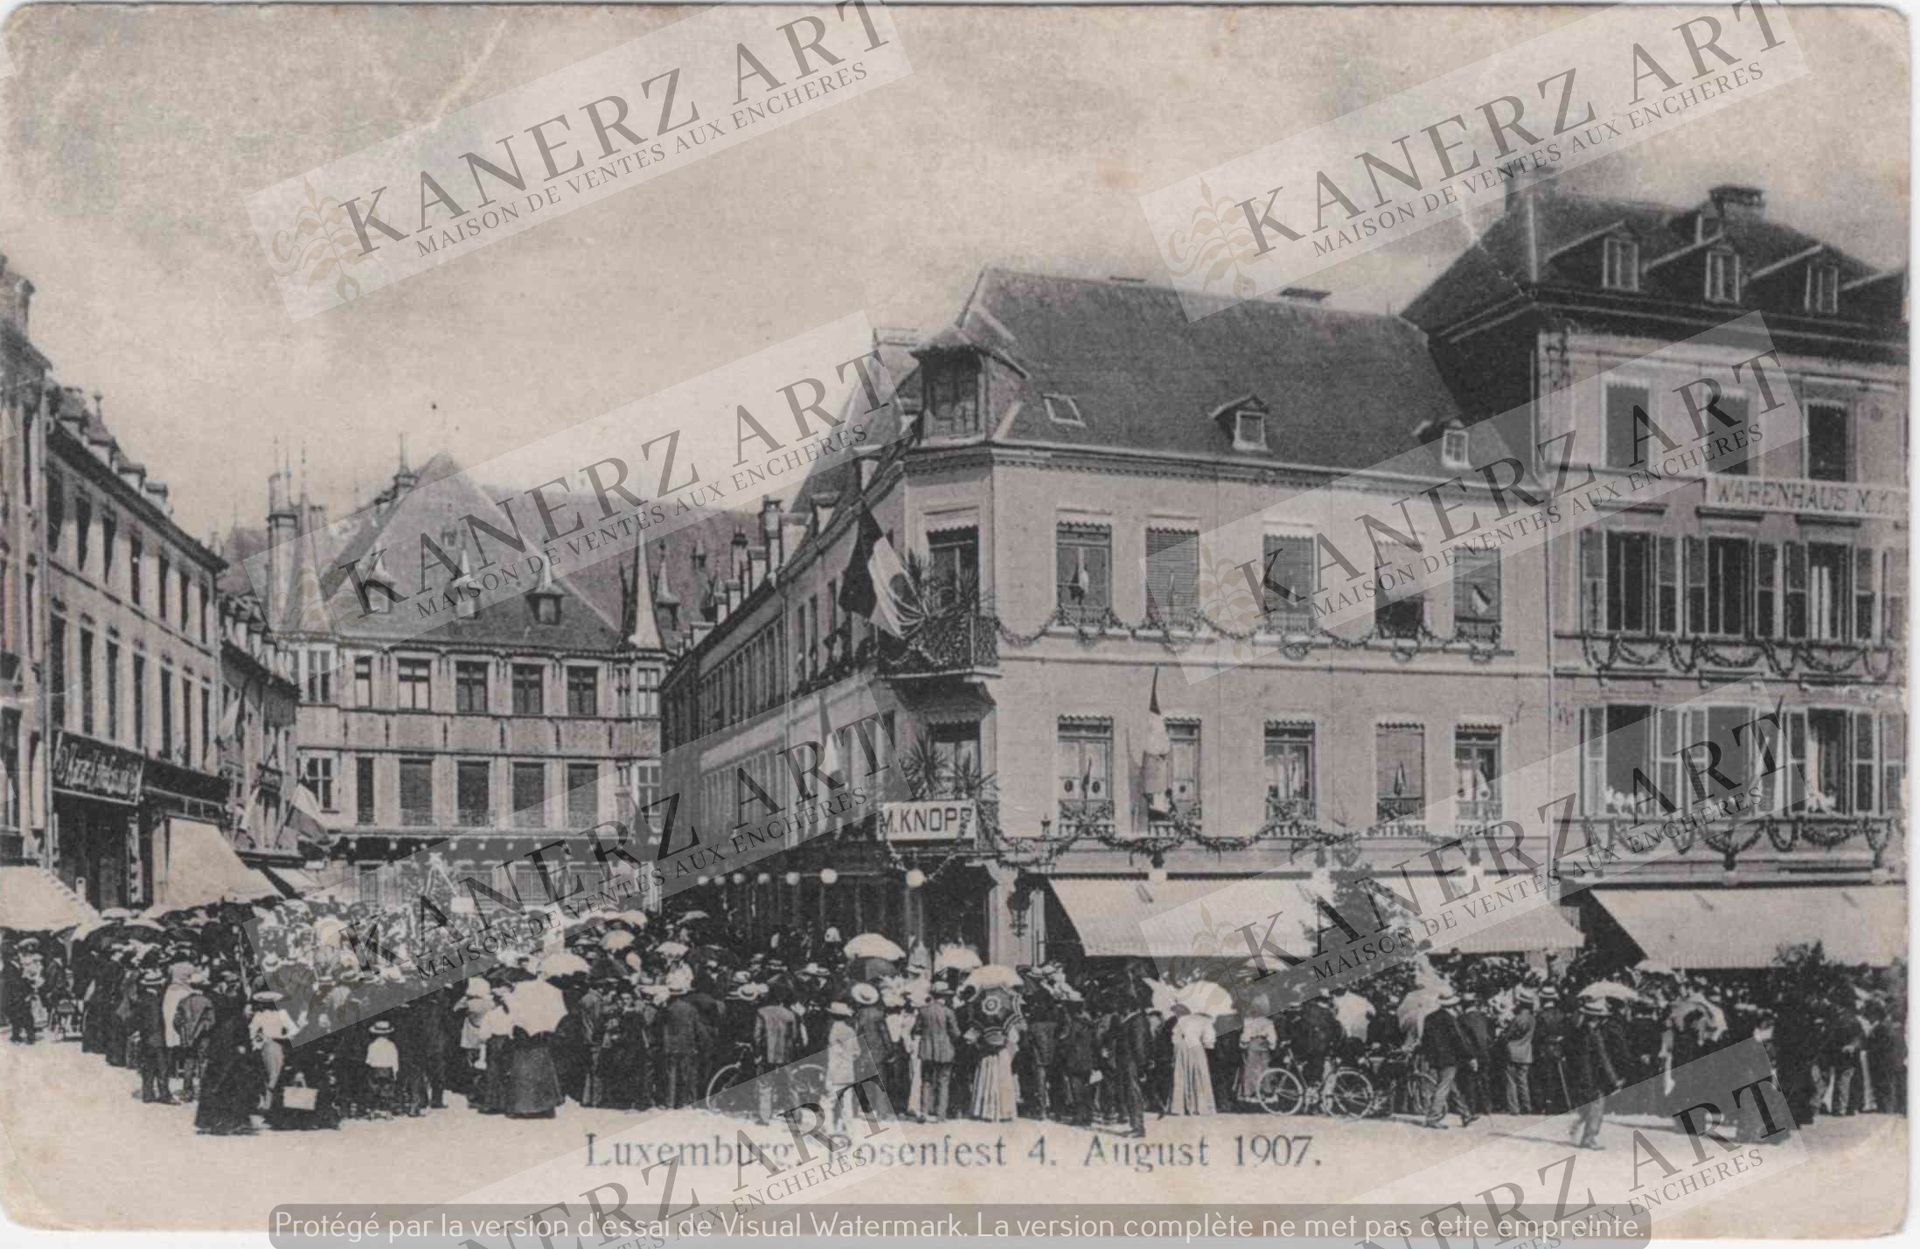 Null (OFFICIAL) 2x Postcard Rosenfest in Luxembourg on August 4th 1907